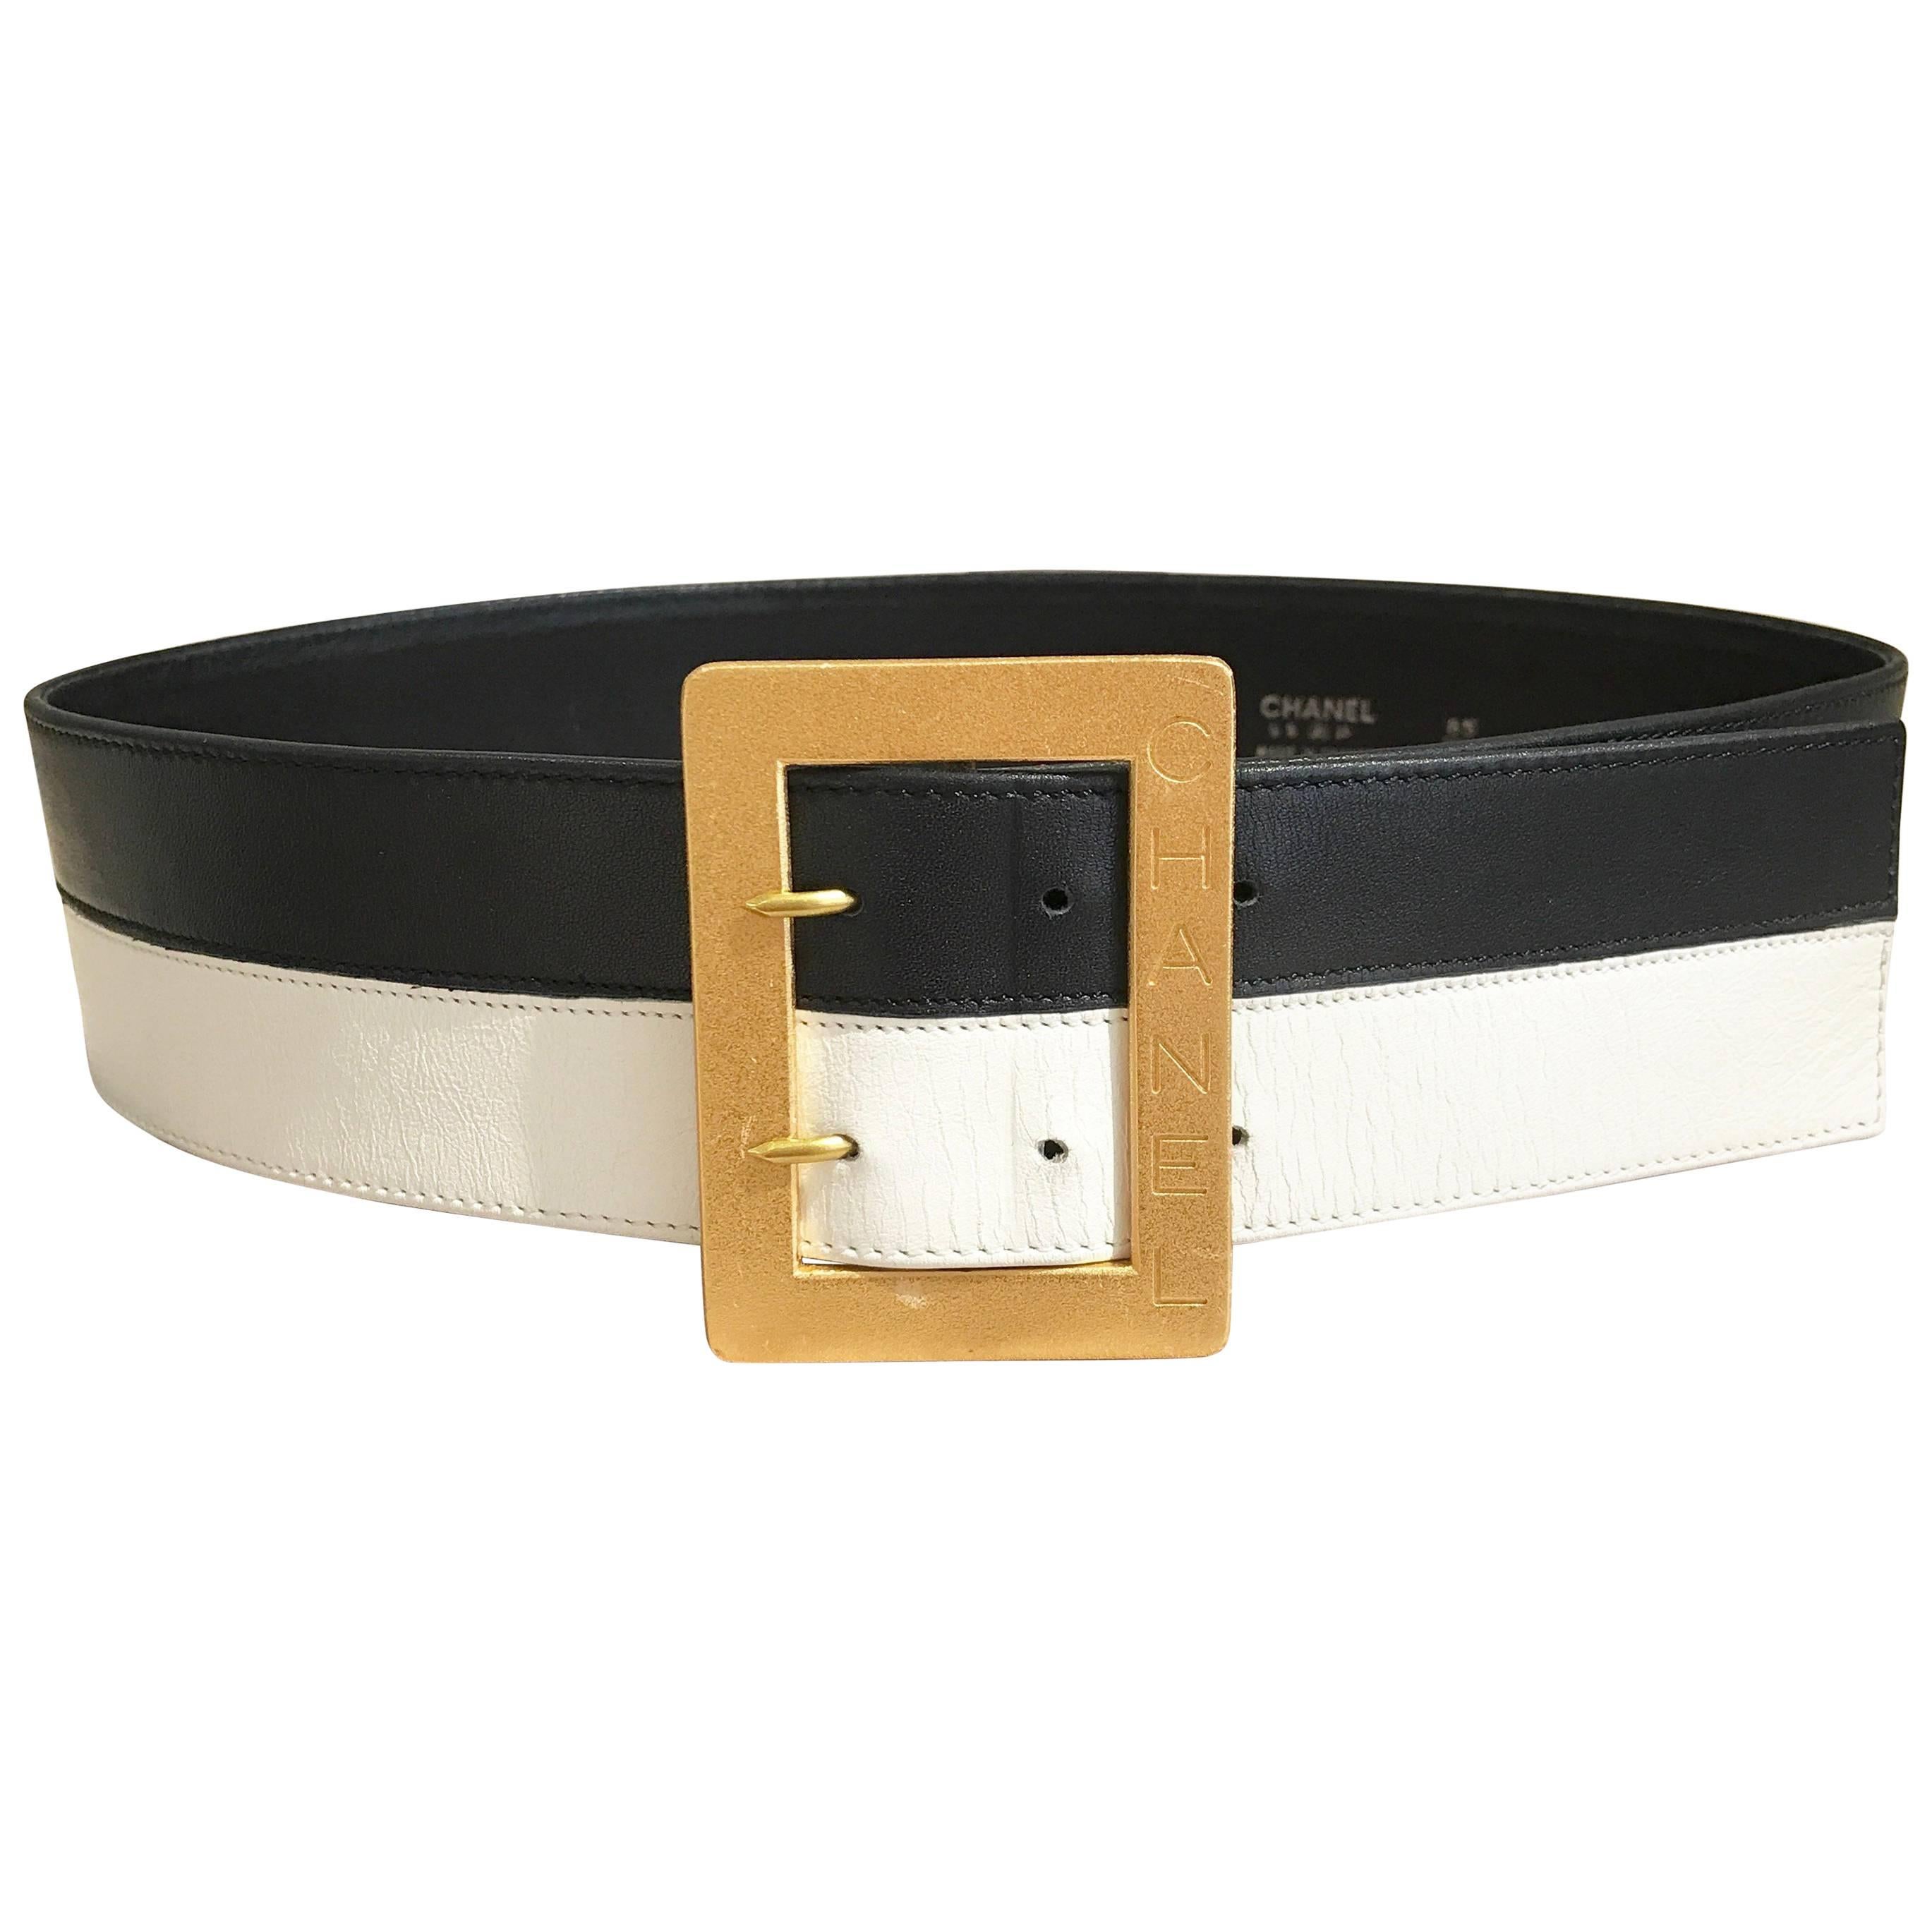 1980s CHANEL Black and White Leather Belt